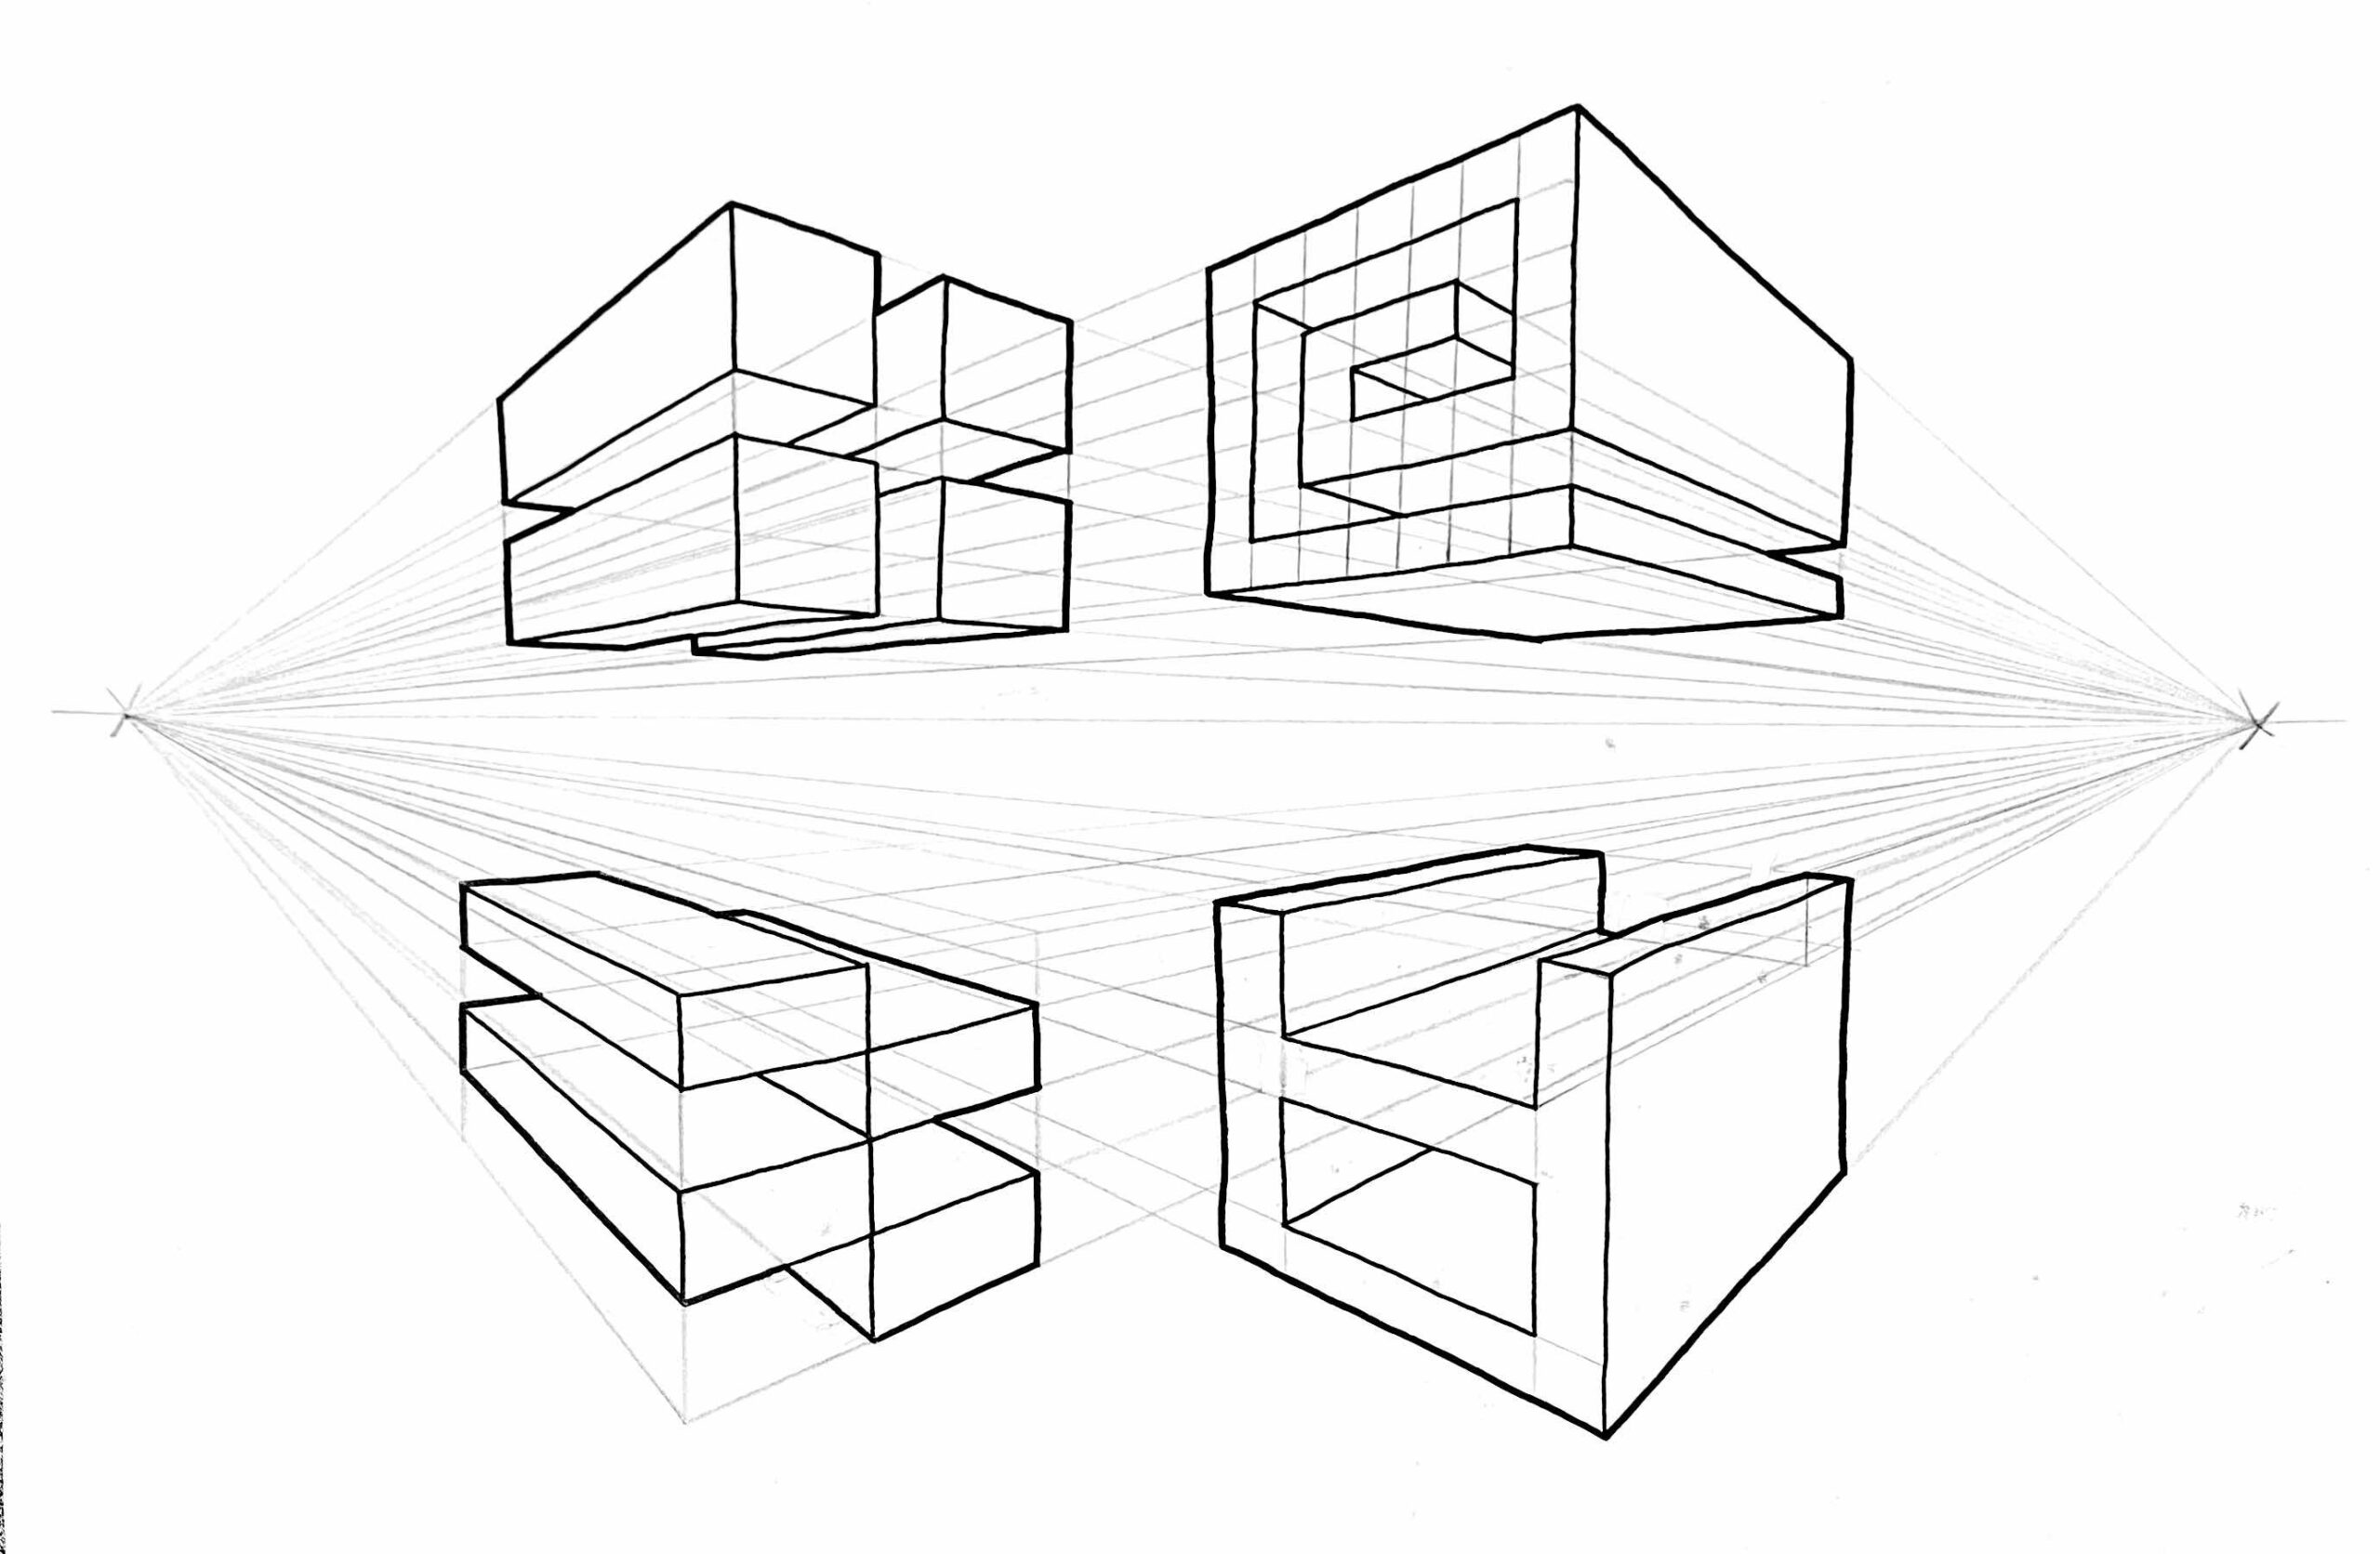 Punjabi] Give (i) an oblique sketch and (ii) an isometric sketch for